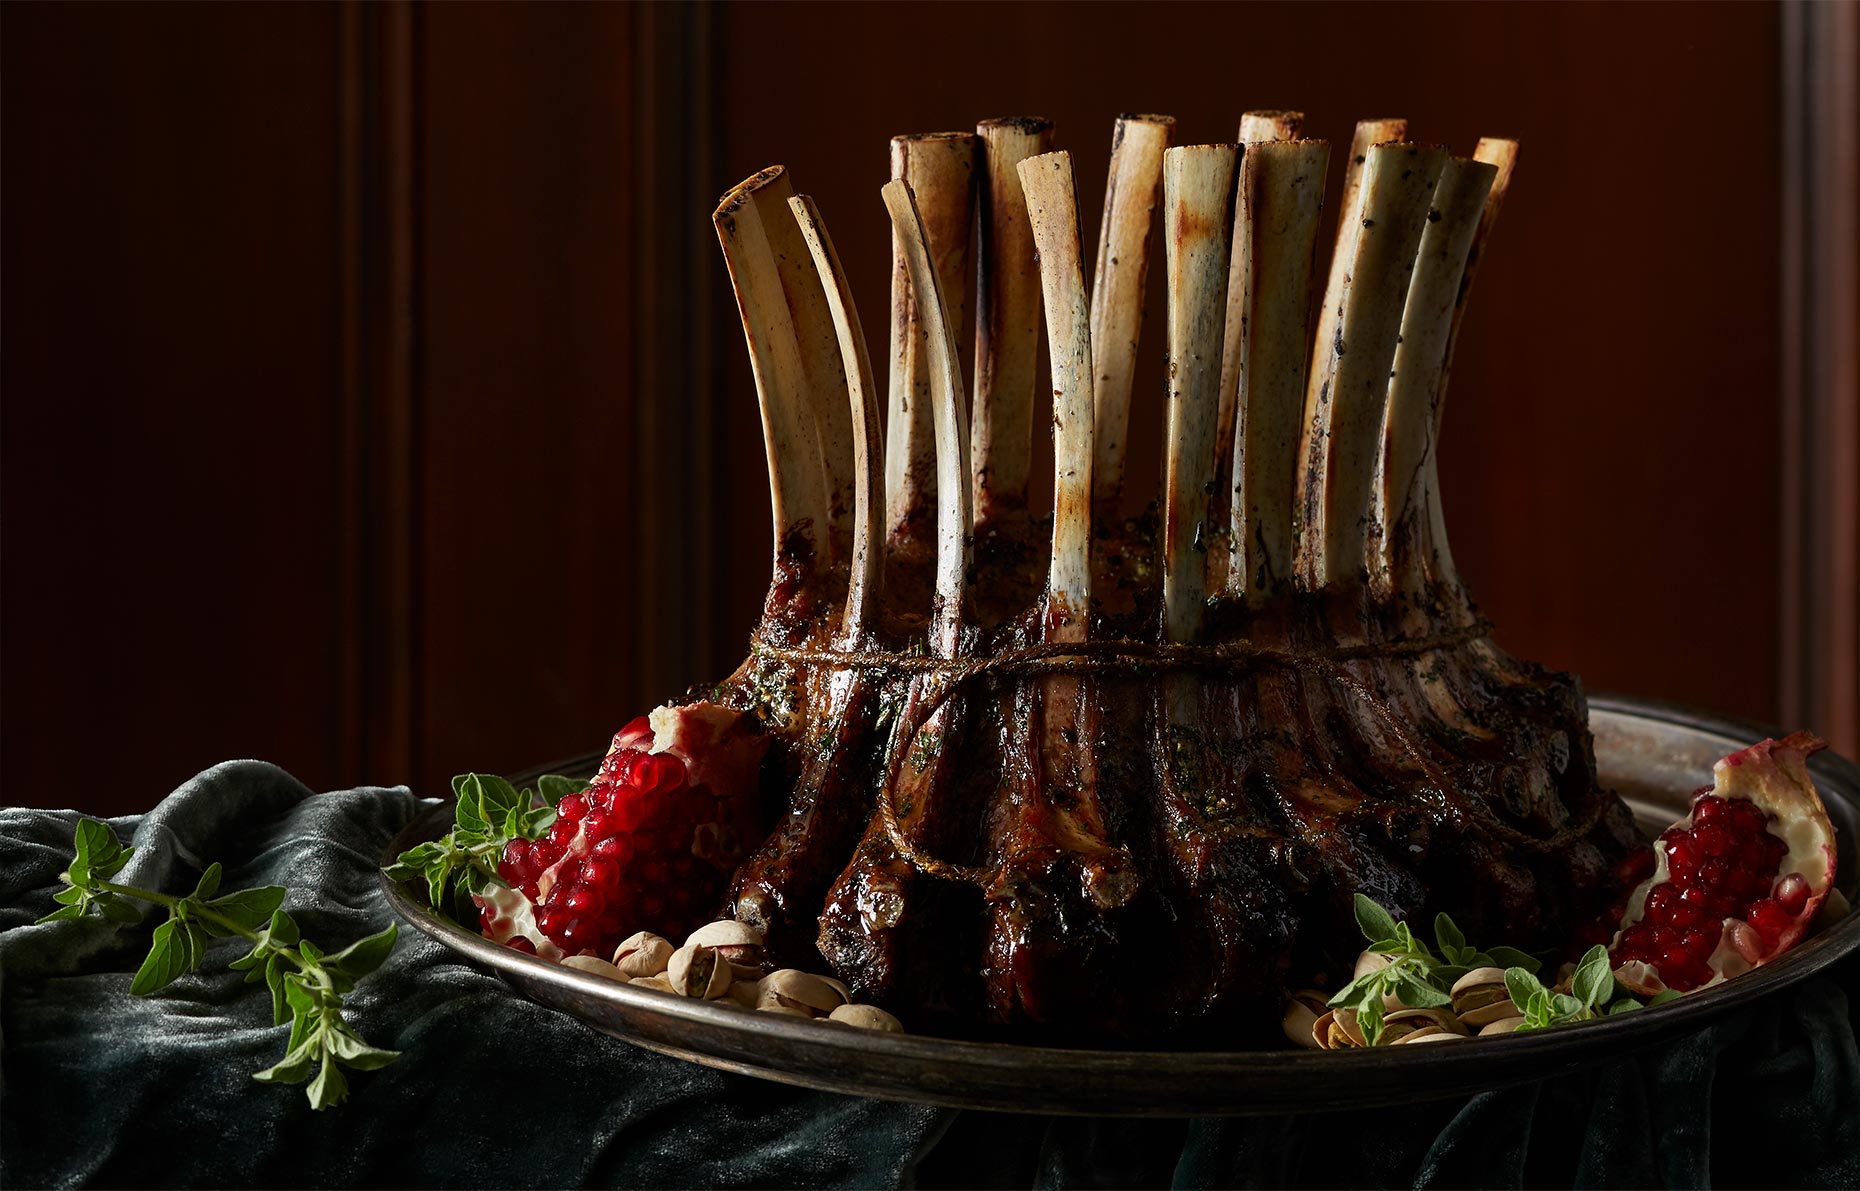 Andy-Post-Food-Photography-Rack-of-Lamb